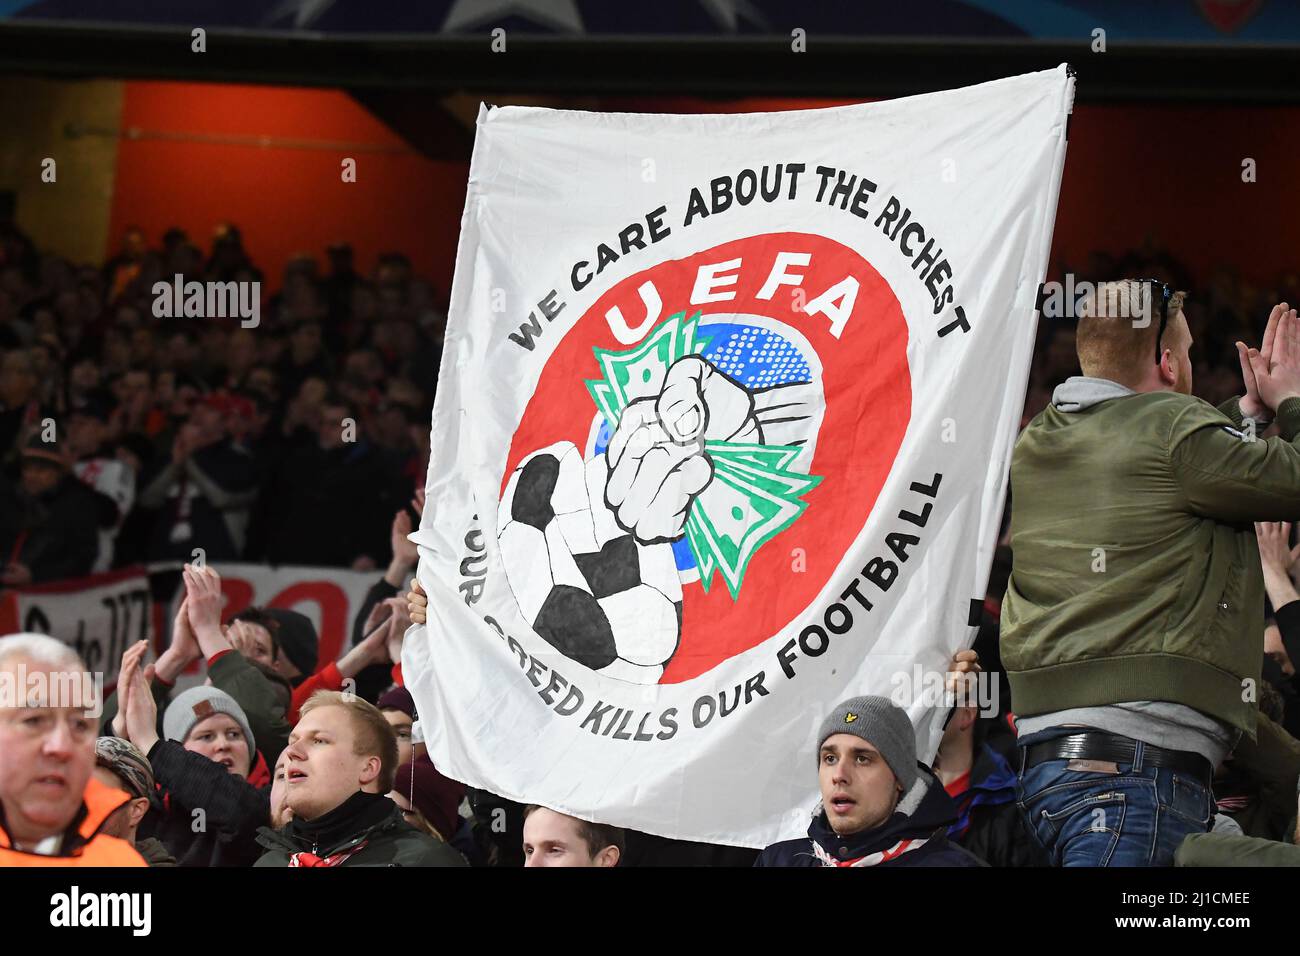 LONDON, ENGLAND - MARCH 7, 2017: Bayern ultras display a protest banner during the second leg of the UEFA Champions League Round of 16 game between Arsenal FC and Bayern Munchen at Emirates Stadium. Copyright: Cosmin Iftode/Picstaff Stock Photo